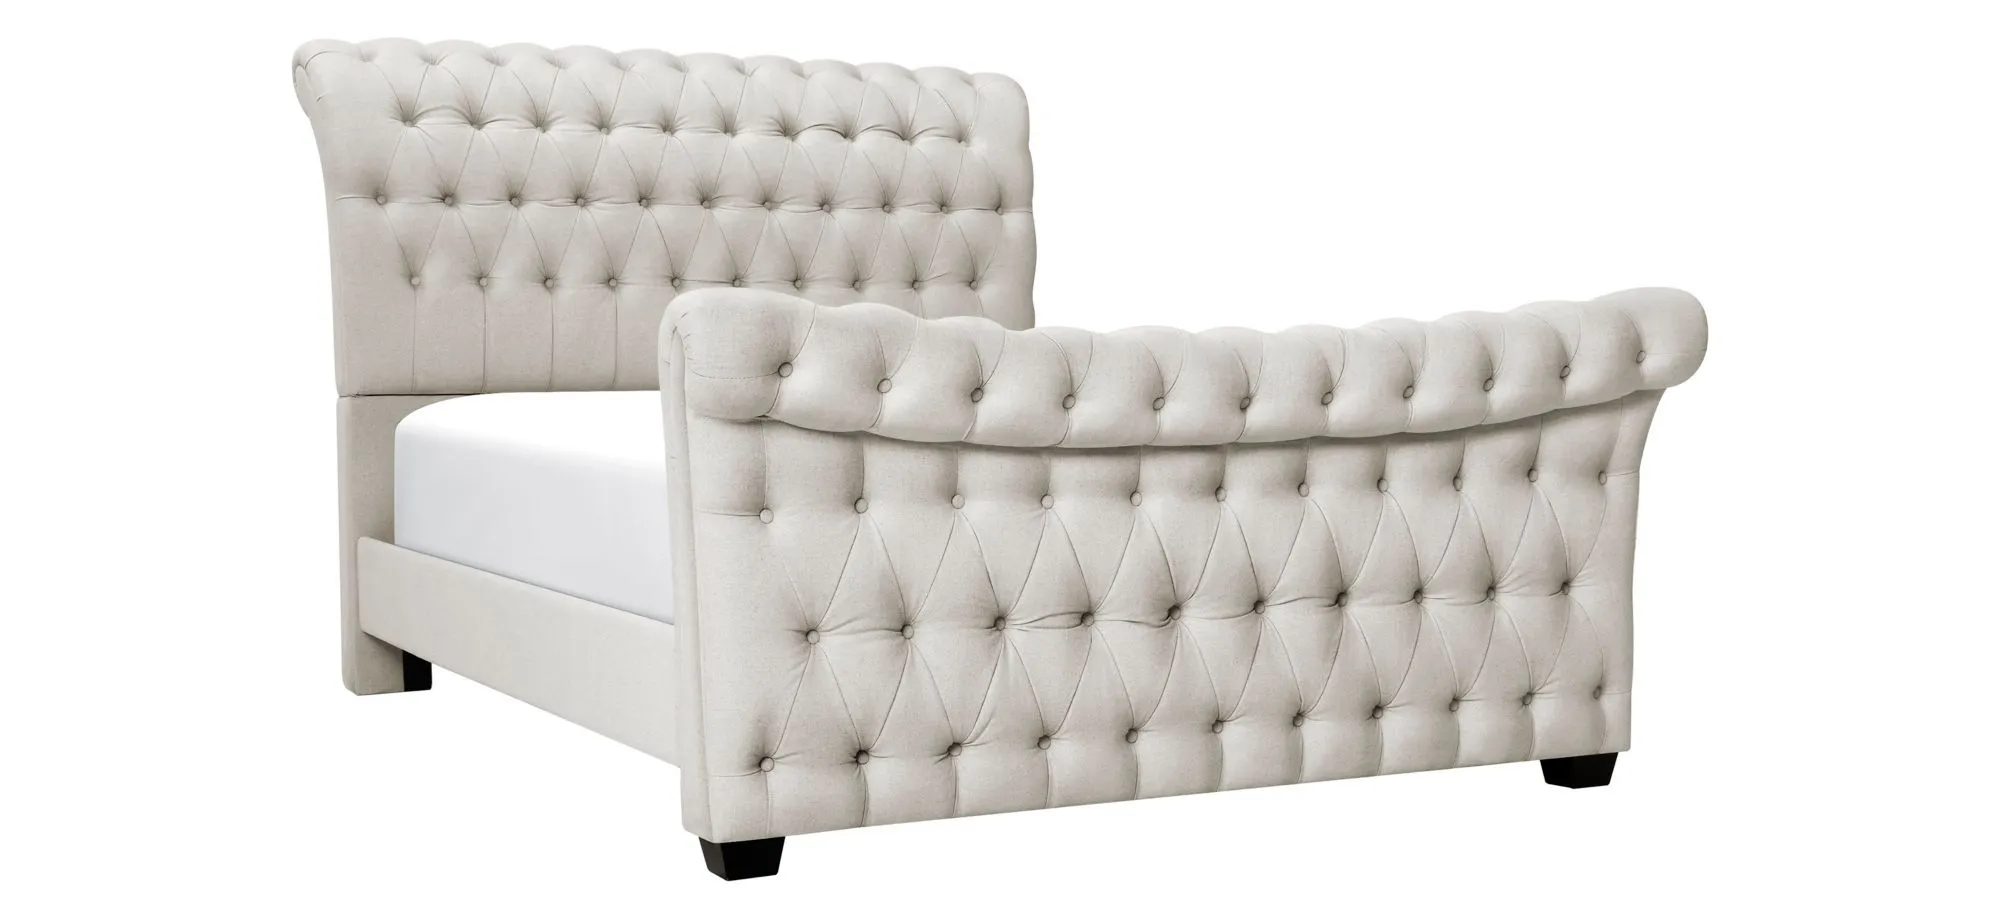 Odette Upholstered Sleigh Bed in Stone by Hillsdale Furniture